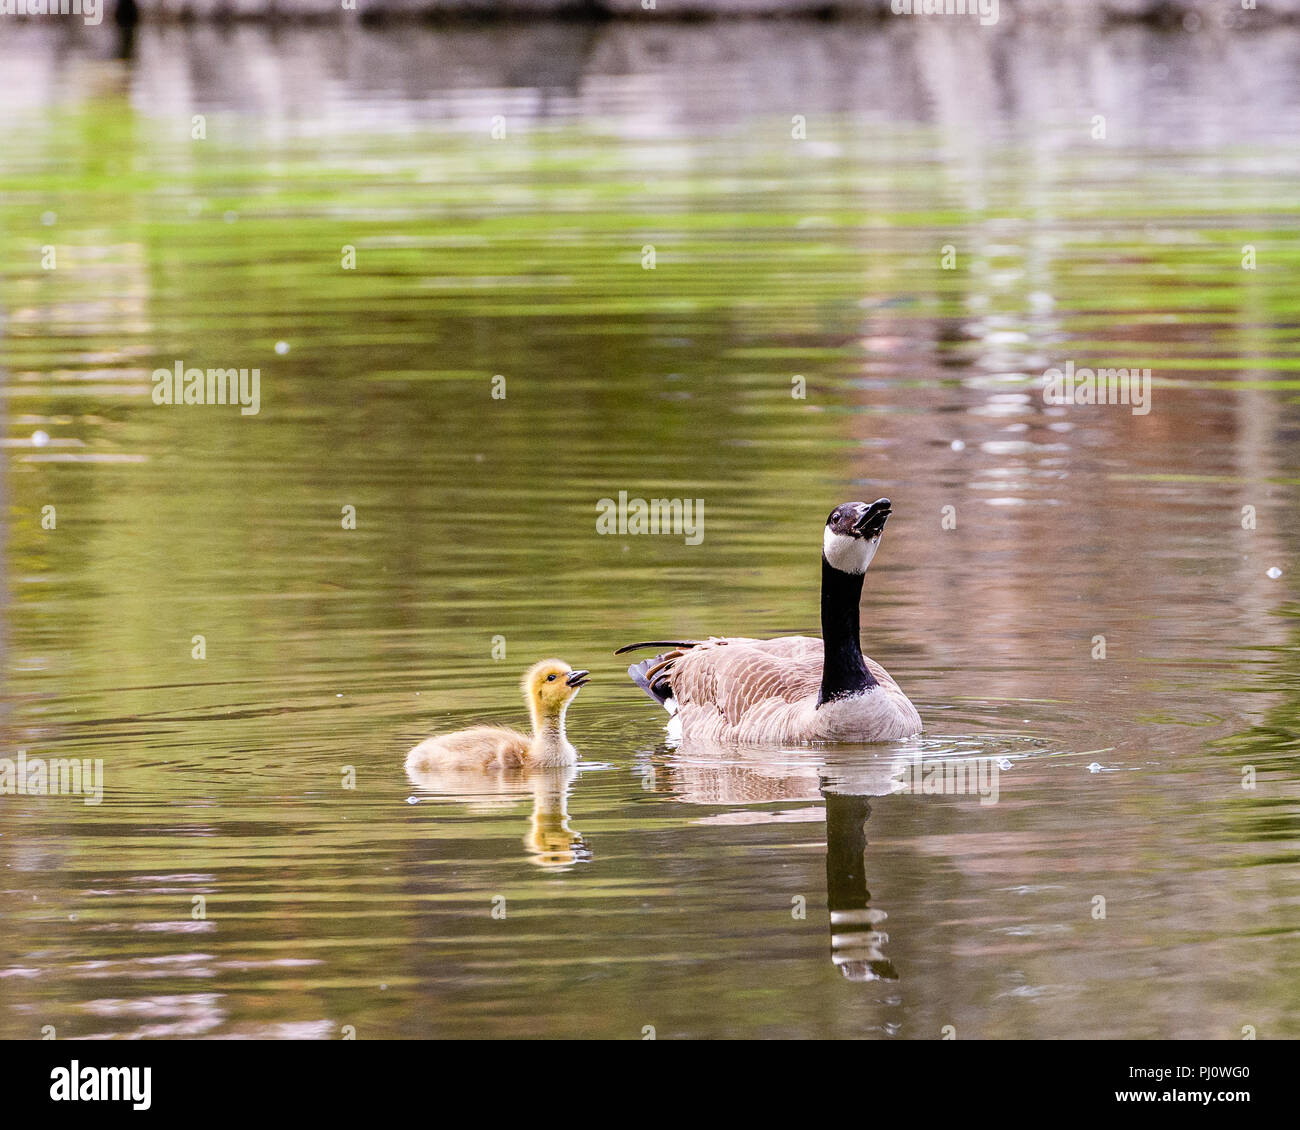 Canada Goose and Baby Gosling Swimming Together In Pond Stock Photo